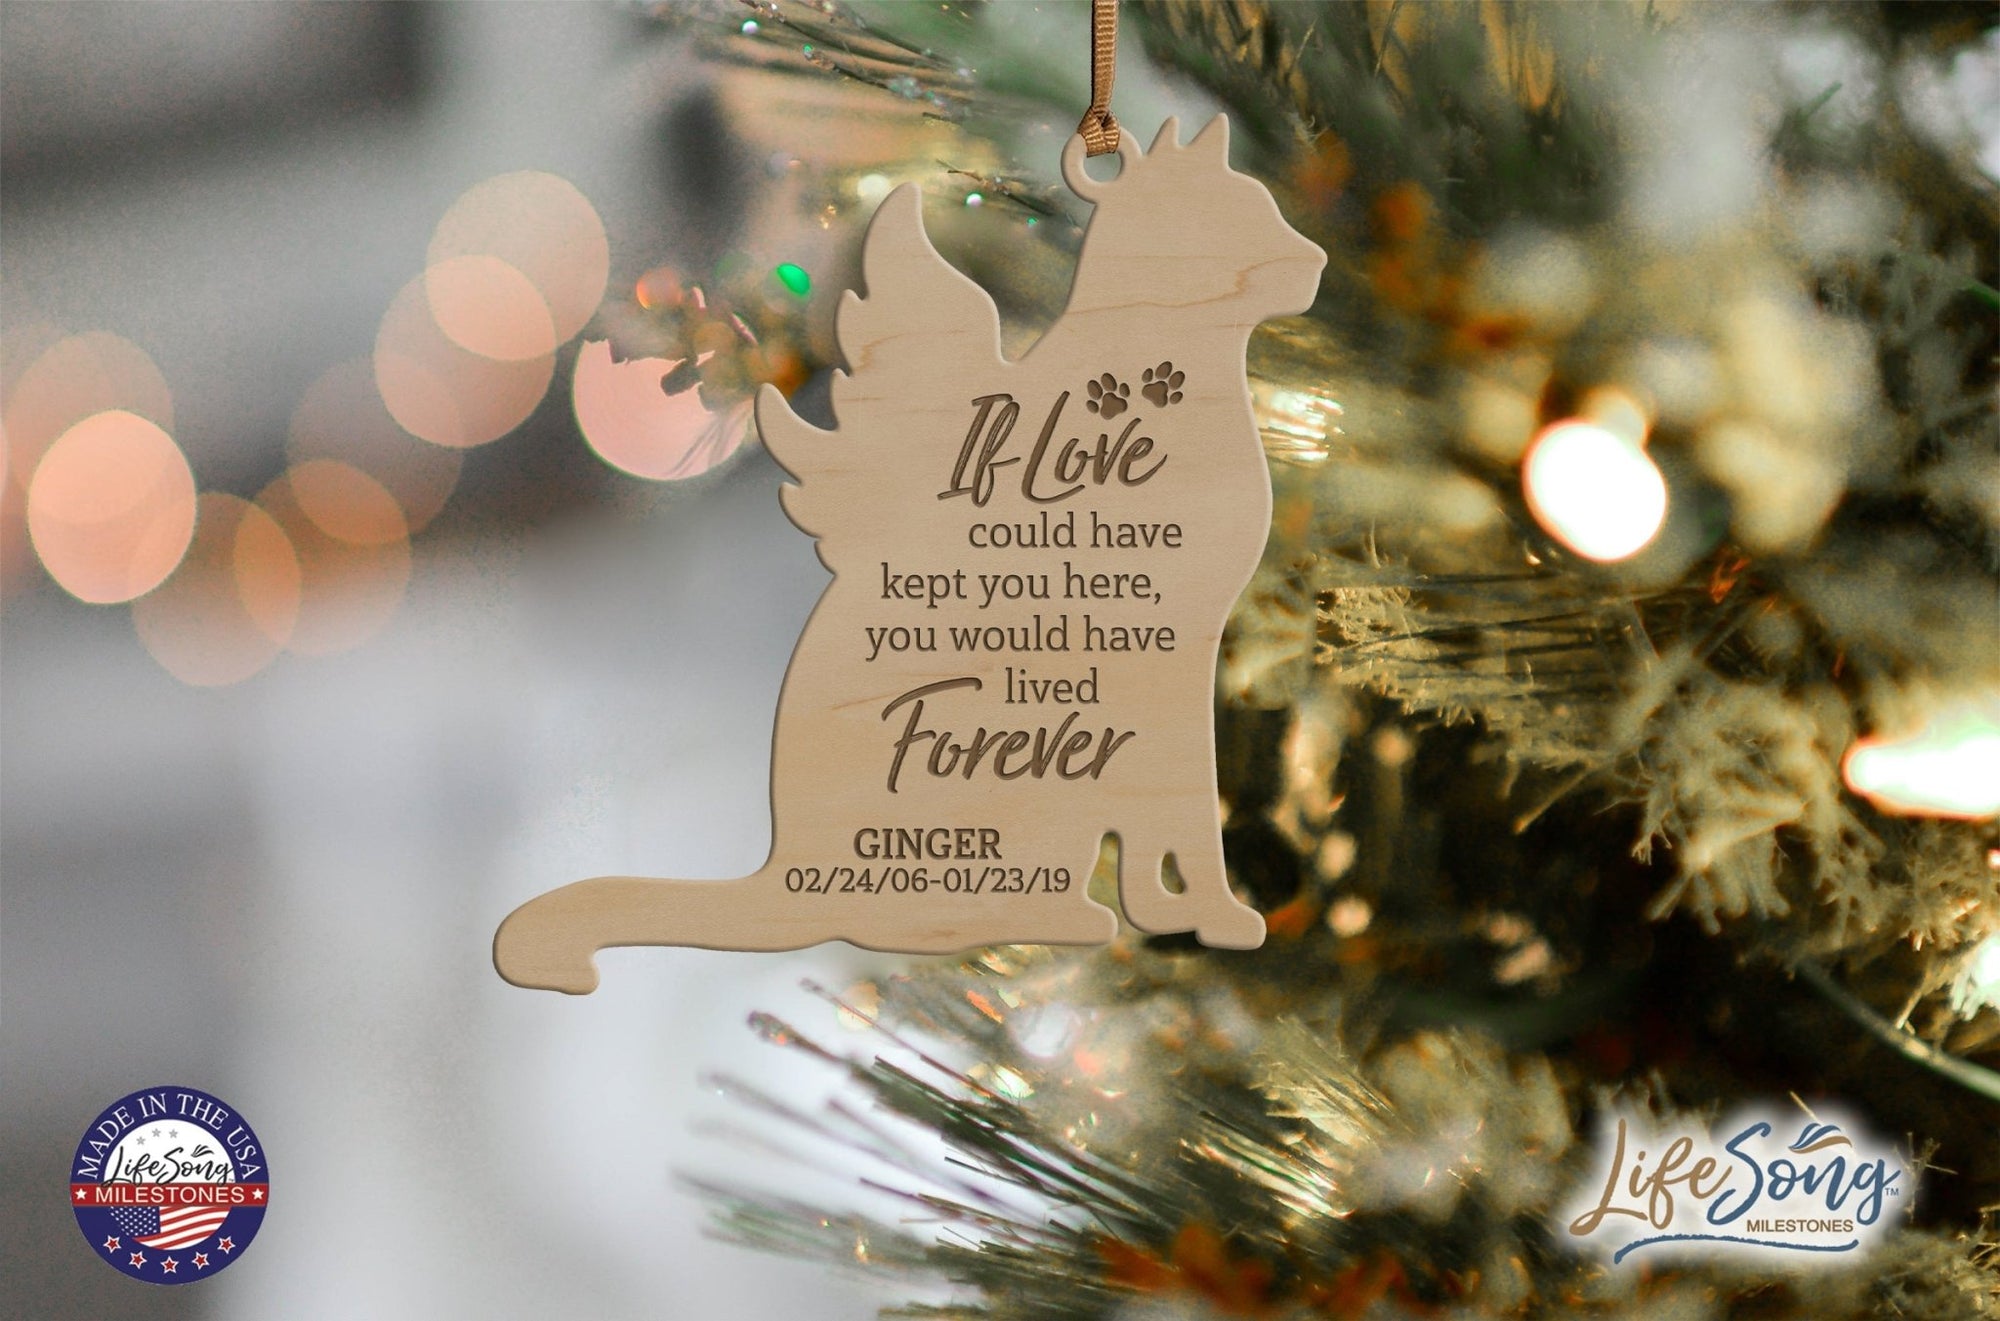 Personalized Engraved Memorial Cat Ornament 4.9375” x 5.375” x 0.125” - If love could have kept you here (PAWS) - LifeSong Milestones